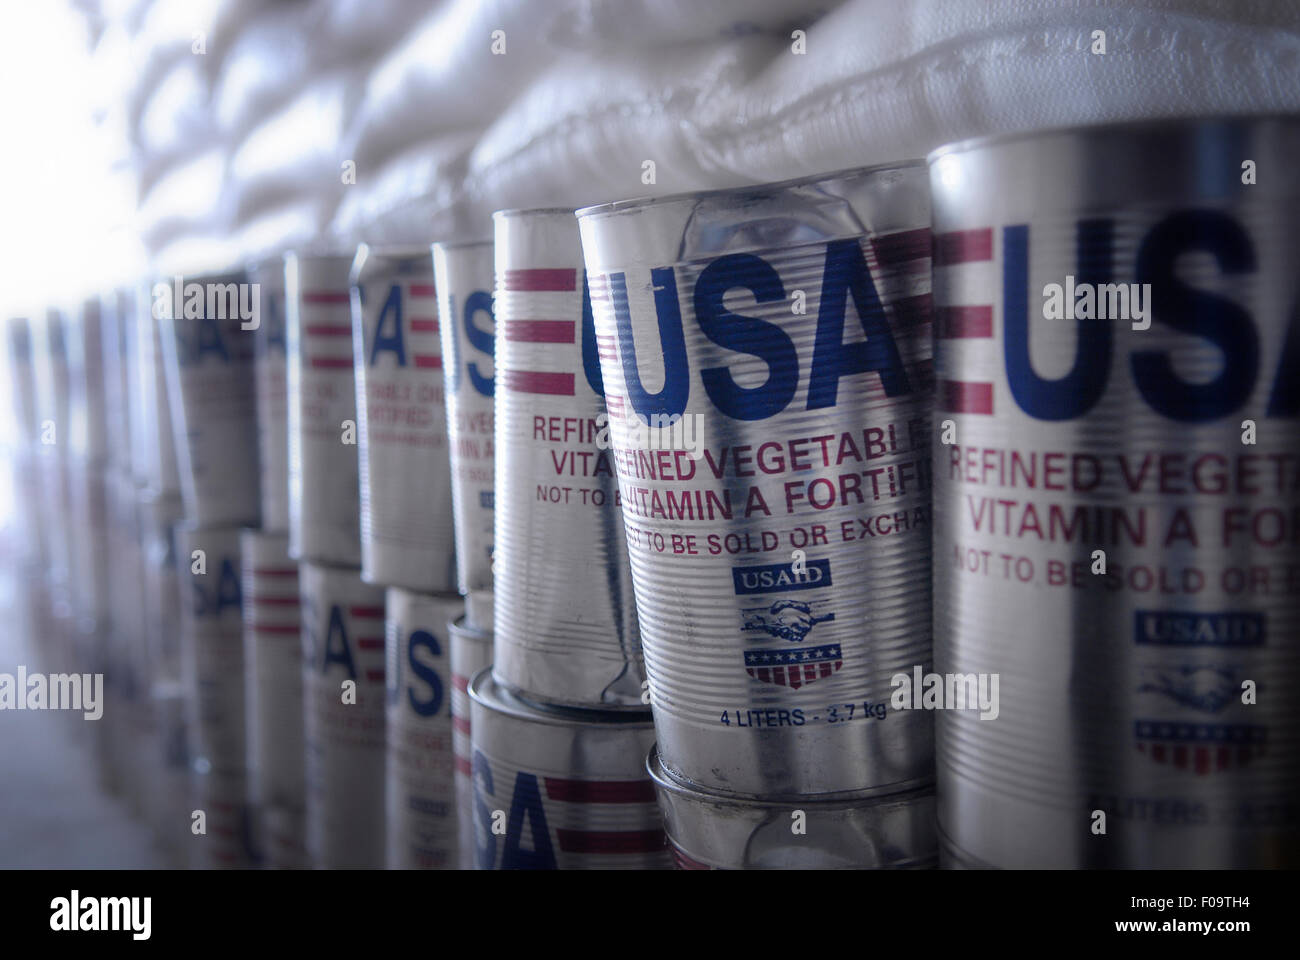 Packed cans of refined vegetable oil from United States Agency for International Development ( USAID ) in a storage warehouse of World Food Programme WFP in the city of Goma, North Kivu, DR Congo Africa Stock Photo